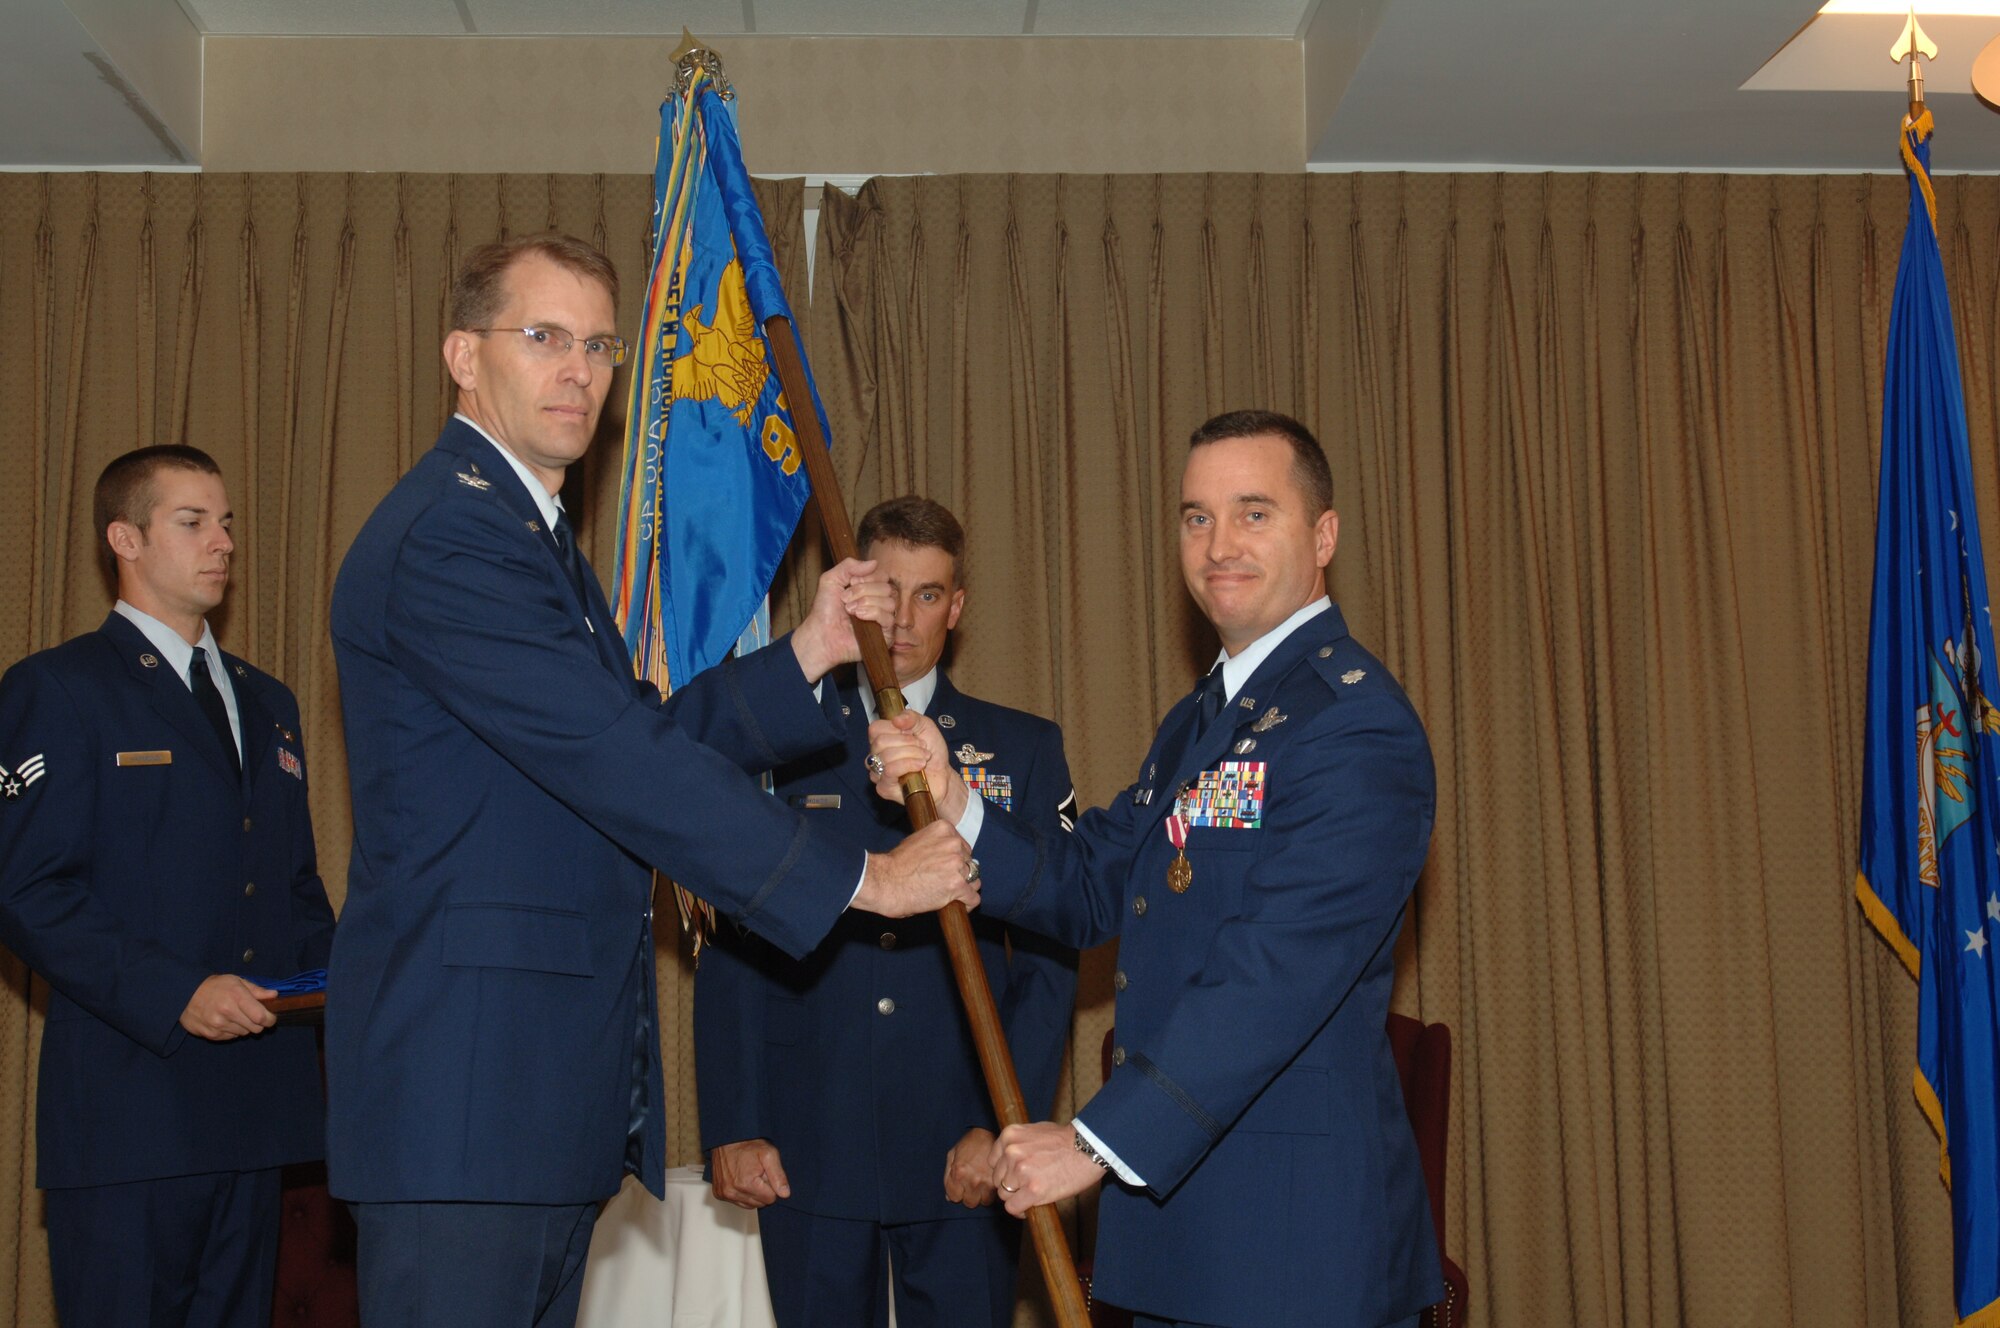 Lt. Col. Patrick Sullivan, 911th Air Refueling Squadron commander, reliquishes the squadron's guidon to Col. Bobby Fowler during a ceremony here June 8. The guidon was sheathed, where it will stay until the 911 ARS reactivates next year under the 916th Operations Group at Seymour Johnson Air Force Base, N.C., as part of Air Force Reserve Command